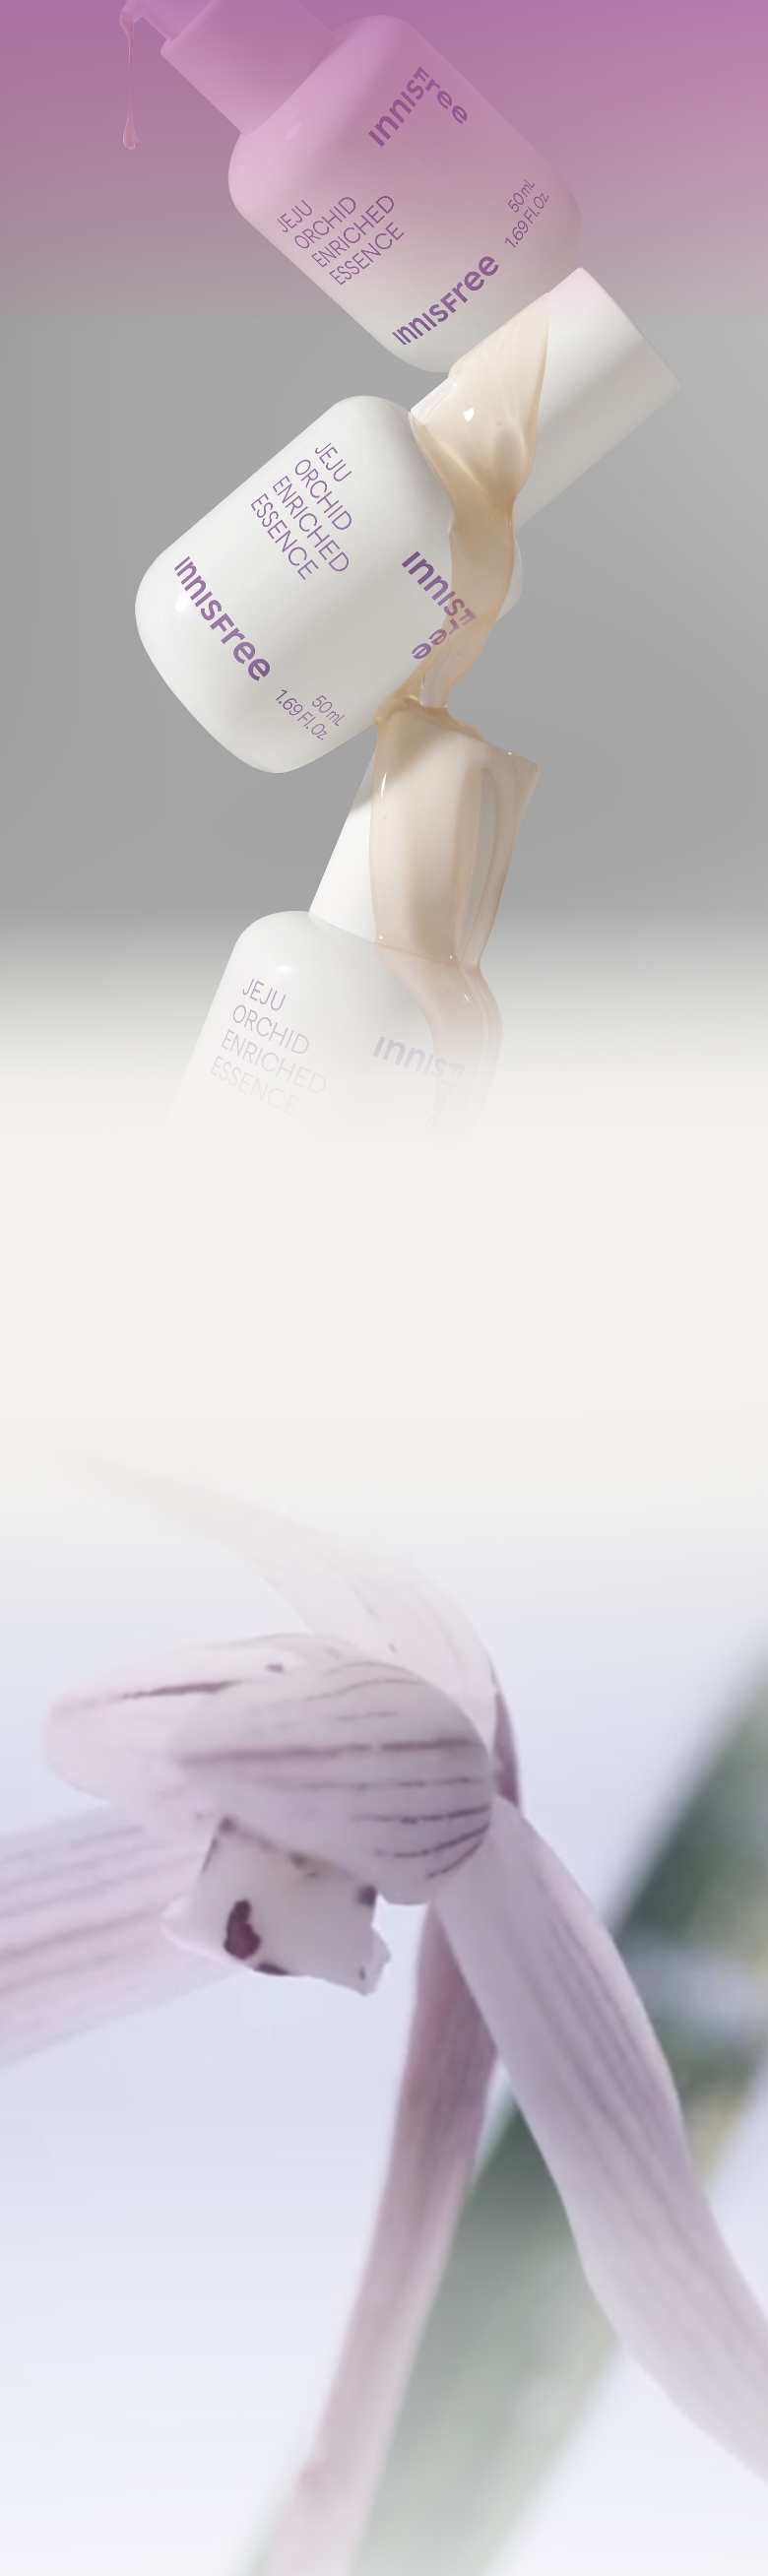 Innisfree - Orchid Enriched Essence